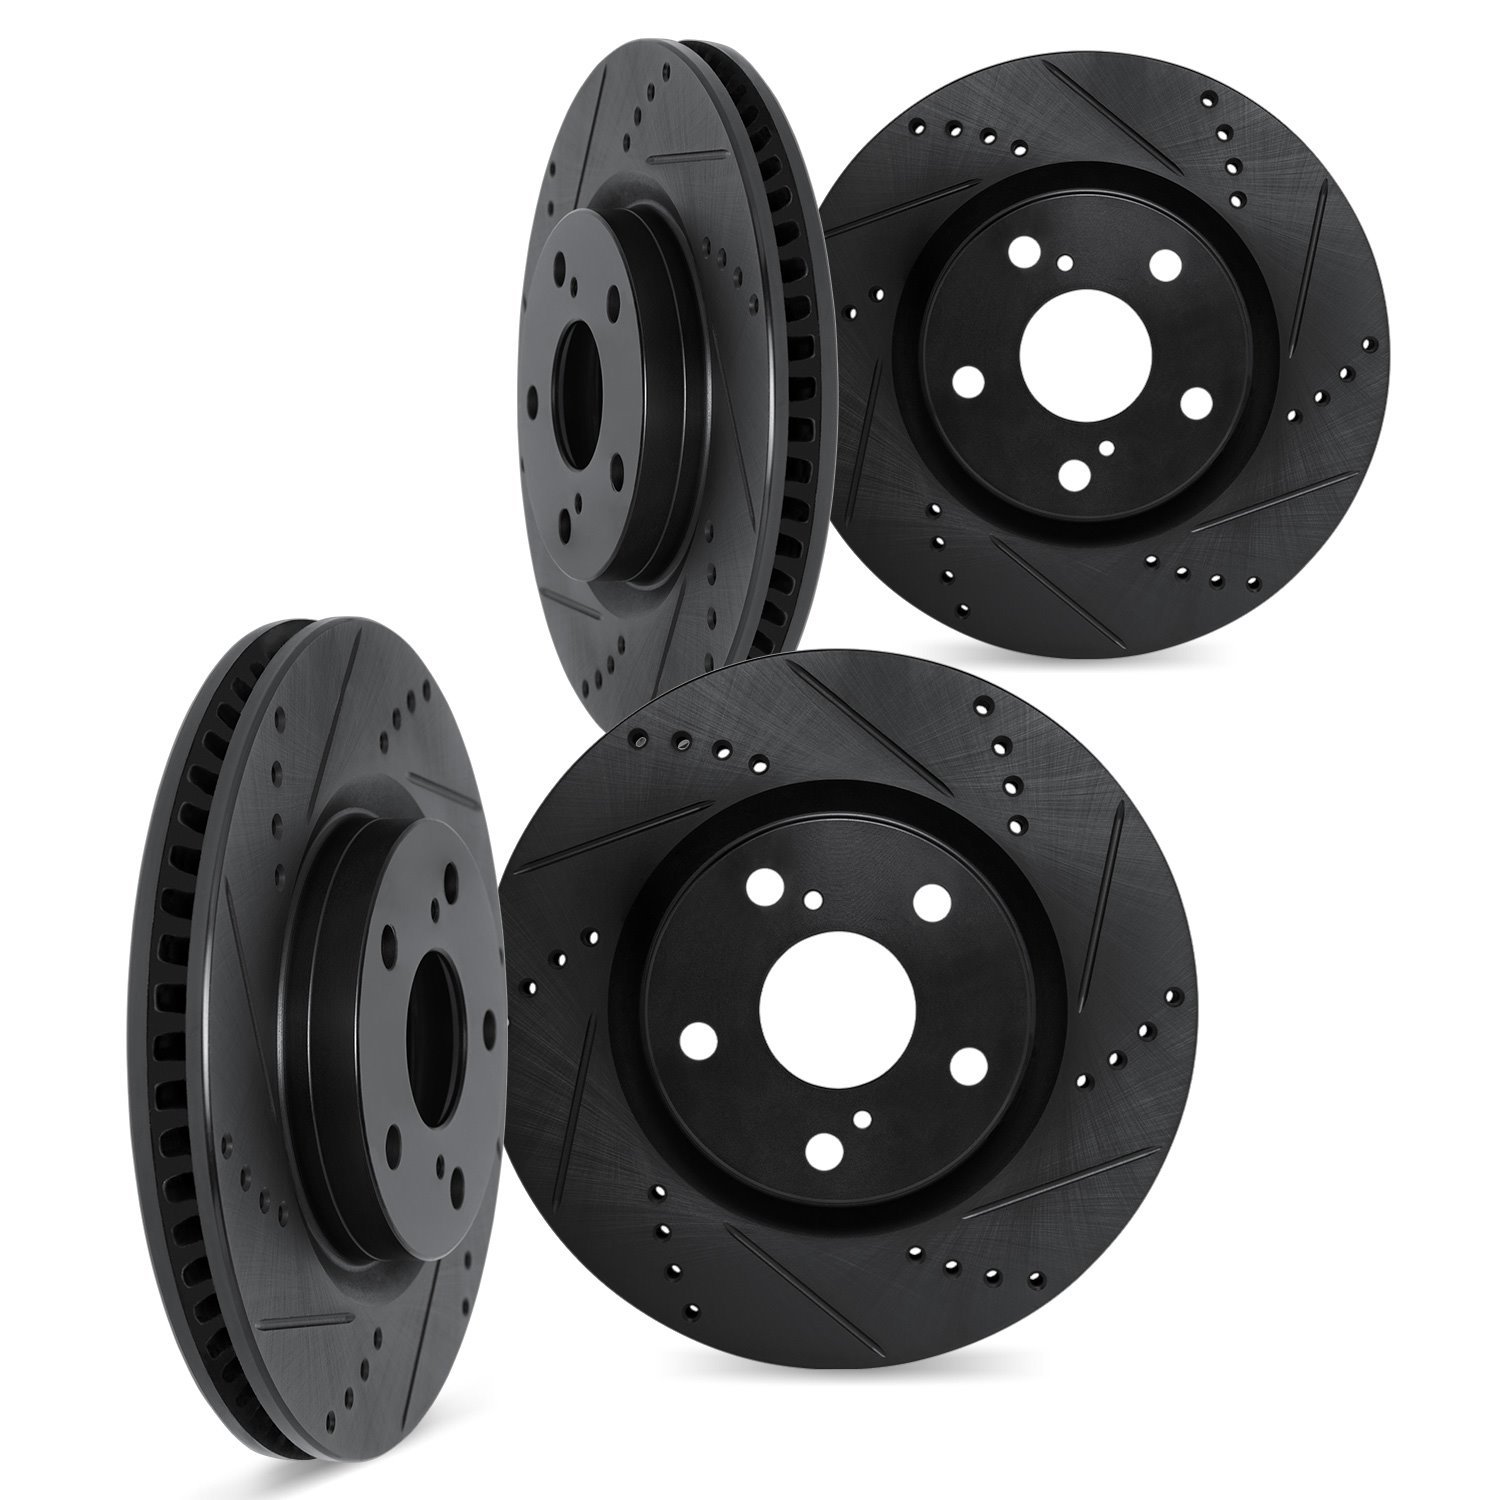 8004-73047 Drilled/Slotted Brake Rotors [Black], 2000-2003 Audi/Volkswagen, Position: Front and Rear